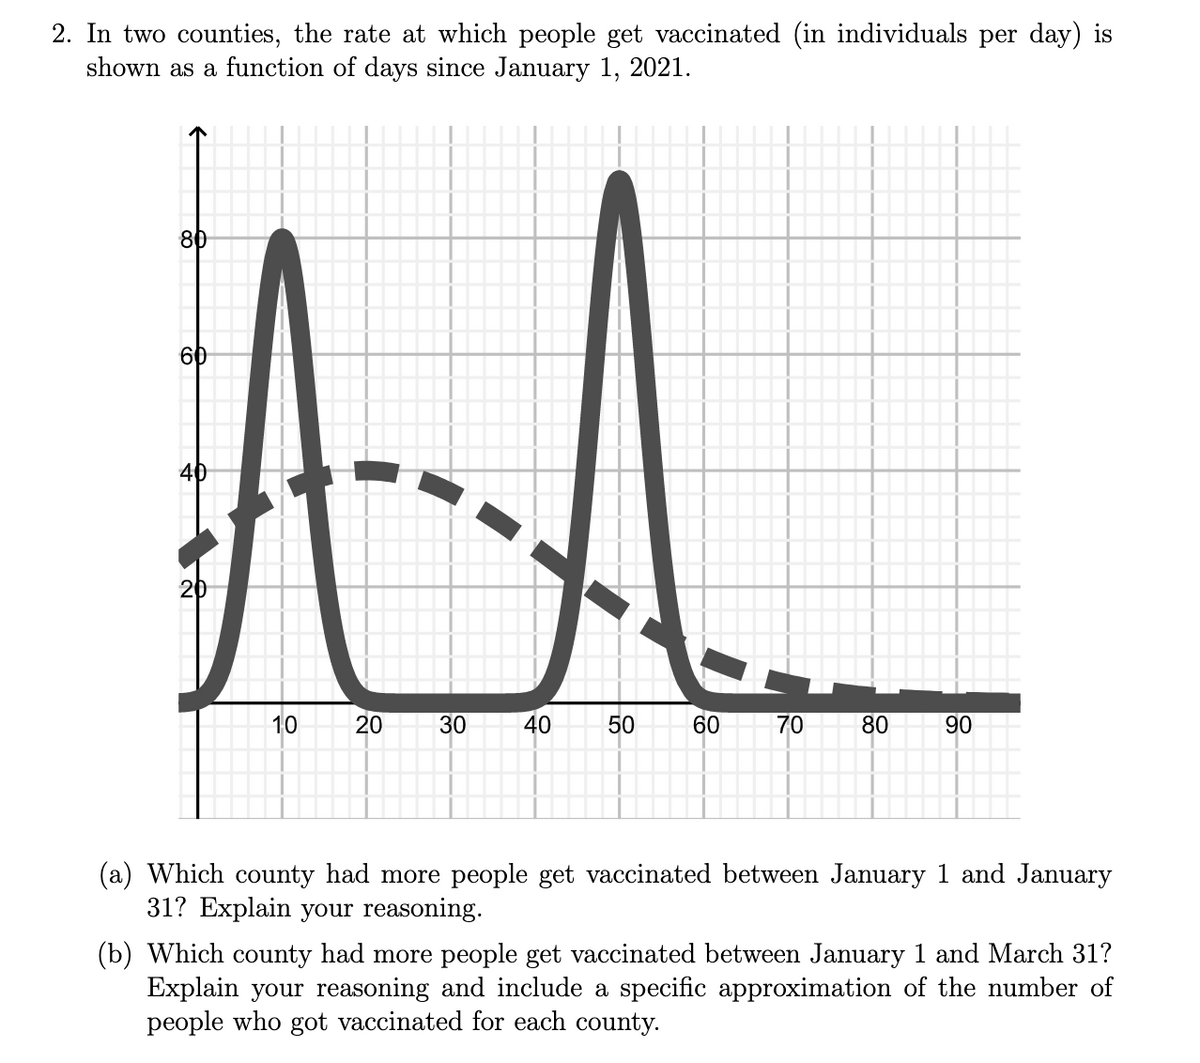 2. In two counties, the rate at which people get vaccinated (in individuals per day) is
shown as a function of days since January 1, 2021.
80
60
40
20
10
20
30
40
50
60
70
80
90
(a) Which county had more people get vaccinated between January 1 and January
31? Explain your reasoning.
(b) Which county had more people get vaccinated between January 1 and March 31?
Explain your reasoning and include a specific approximation of the number of
people who got vaccinated for each county.
